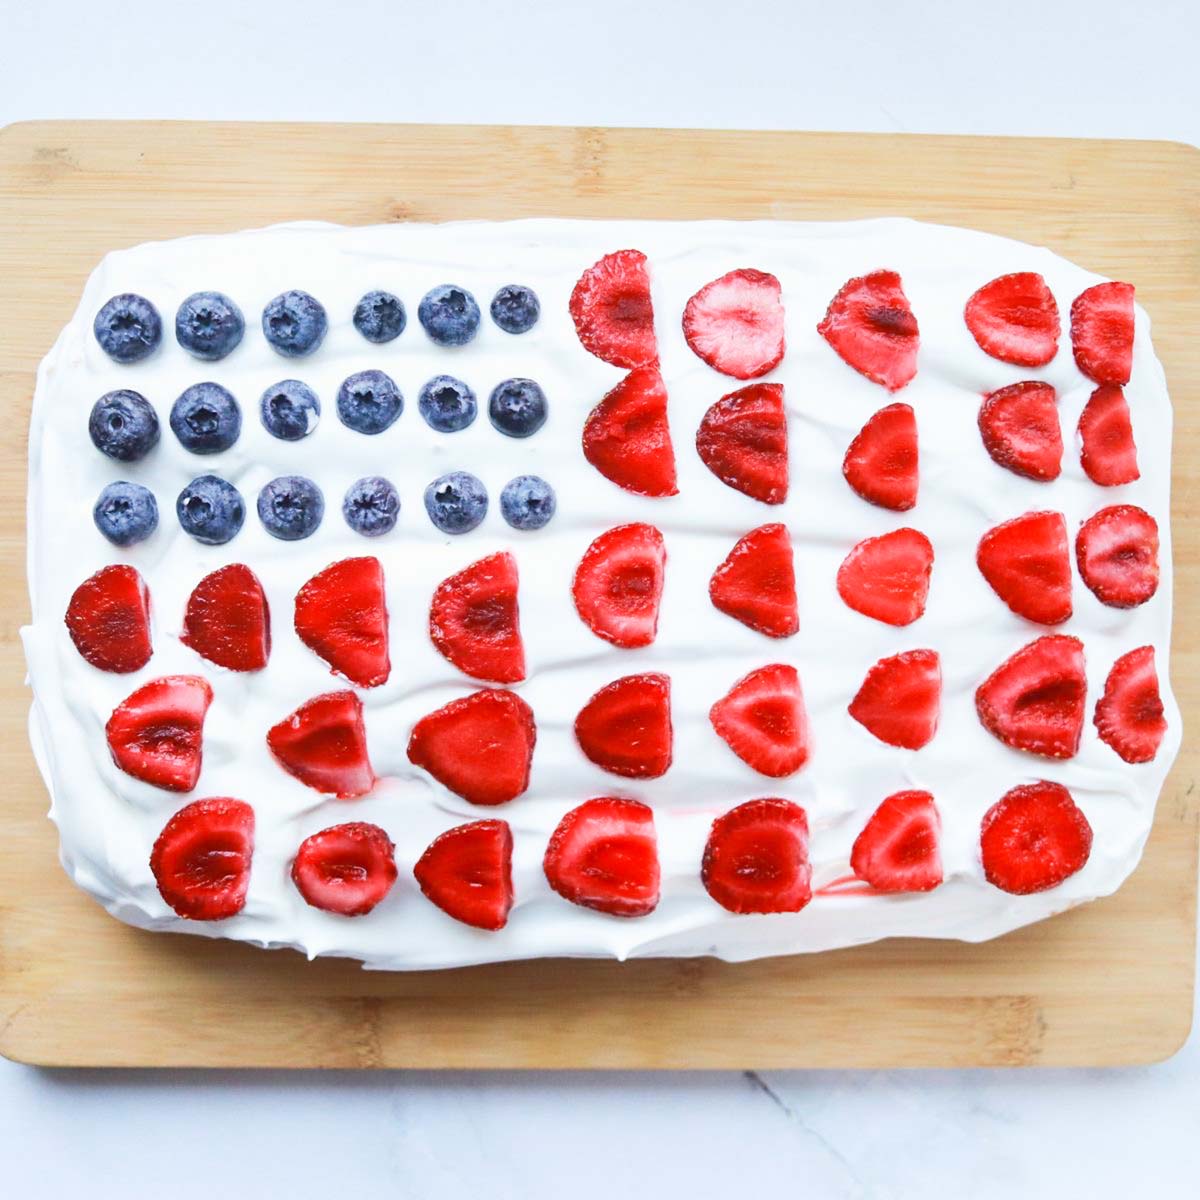 American flag cake with fruit thumbnail picture.